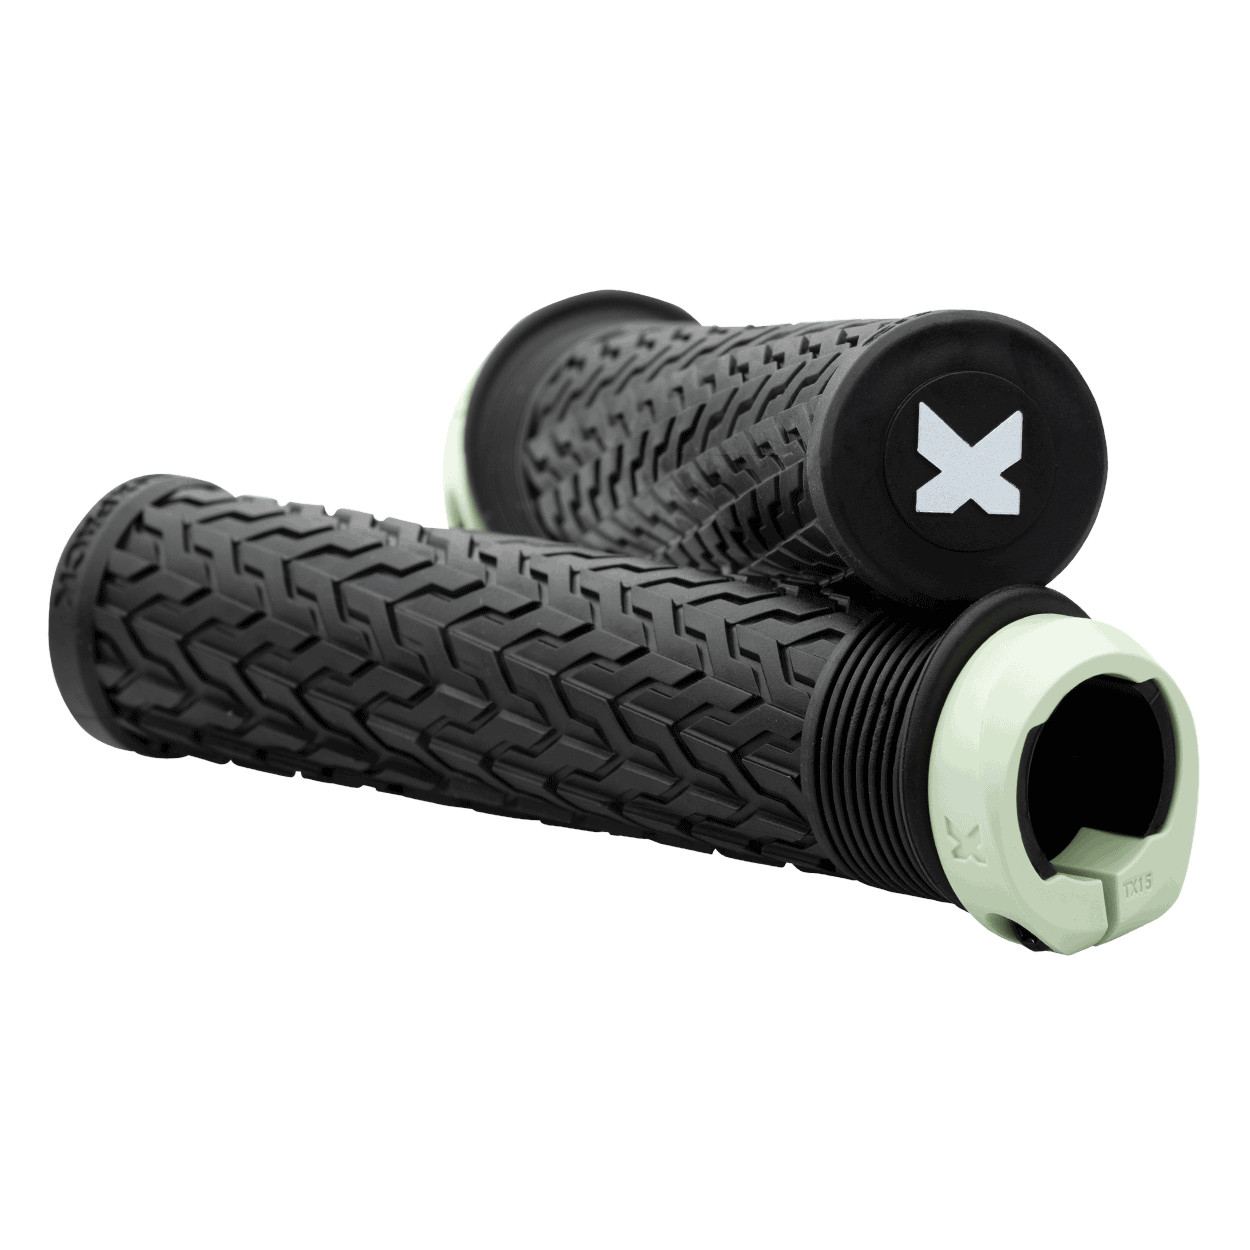 Picture of Sixpack S-Trix PA Lock-On Handlebar Grips - Smoked green